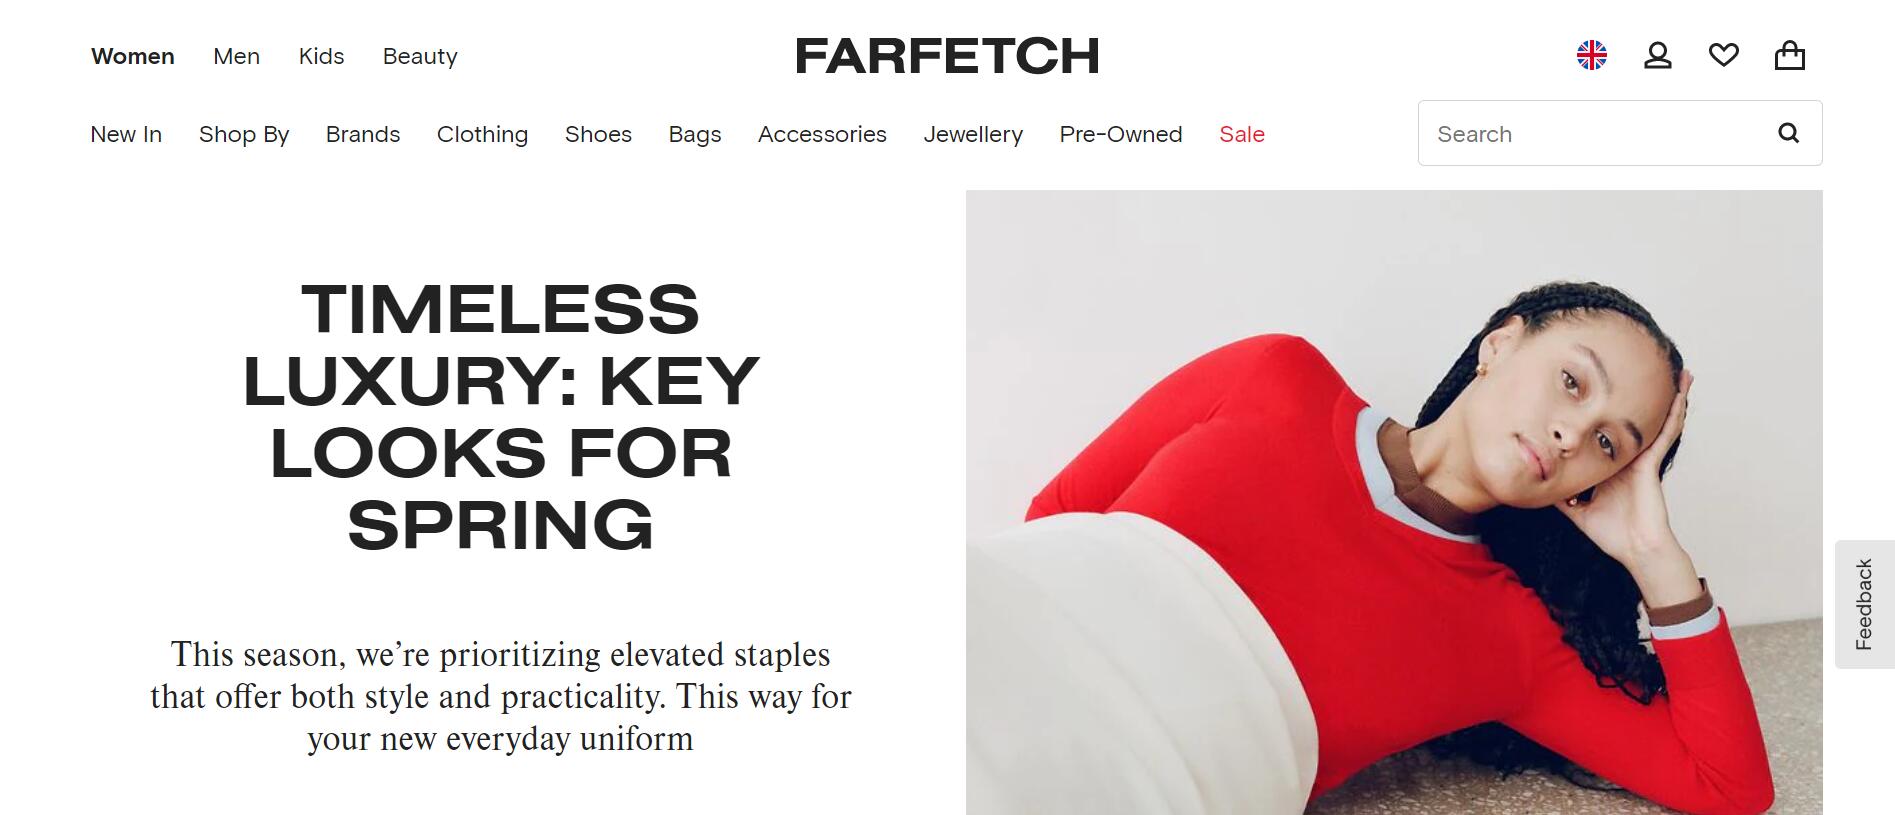 Farfetch Generated Record Revenue of $2.3 Billion in FY2022, with Total Users Reaching 3.92 Million